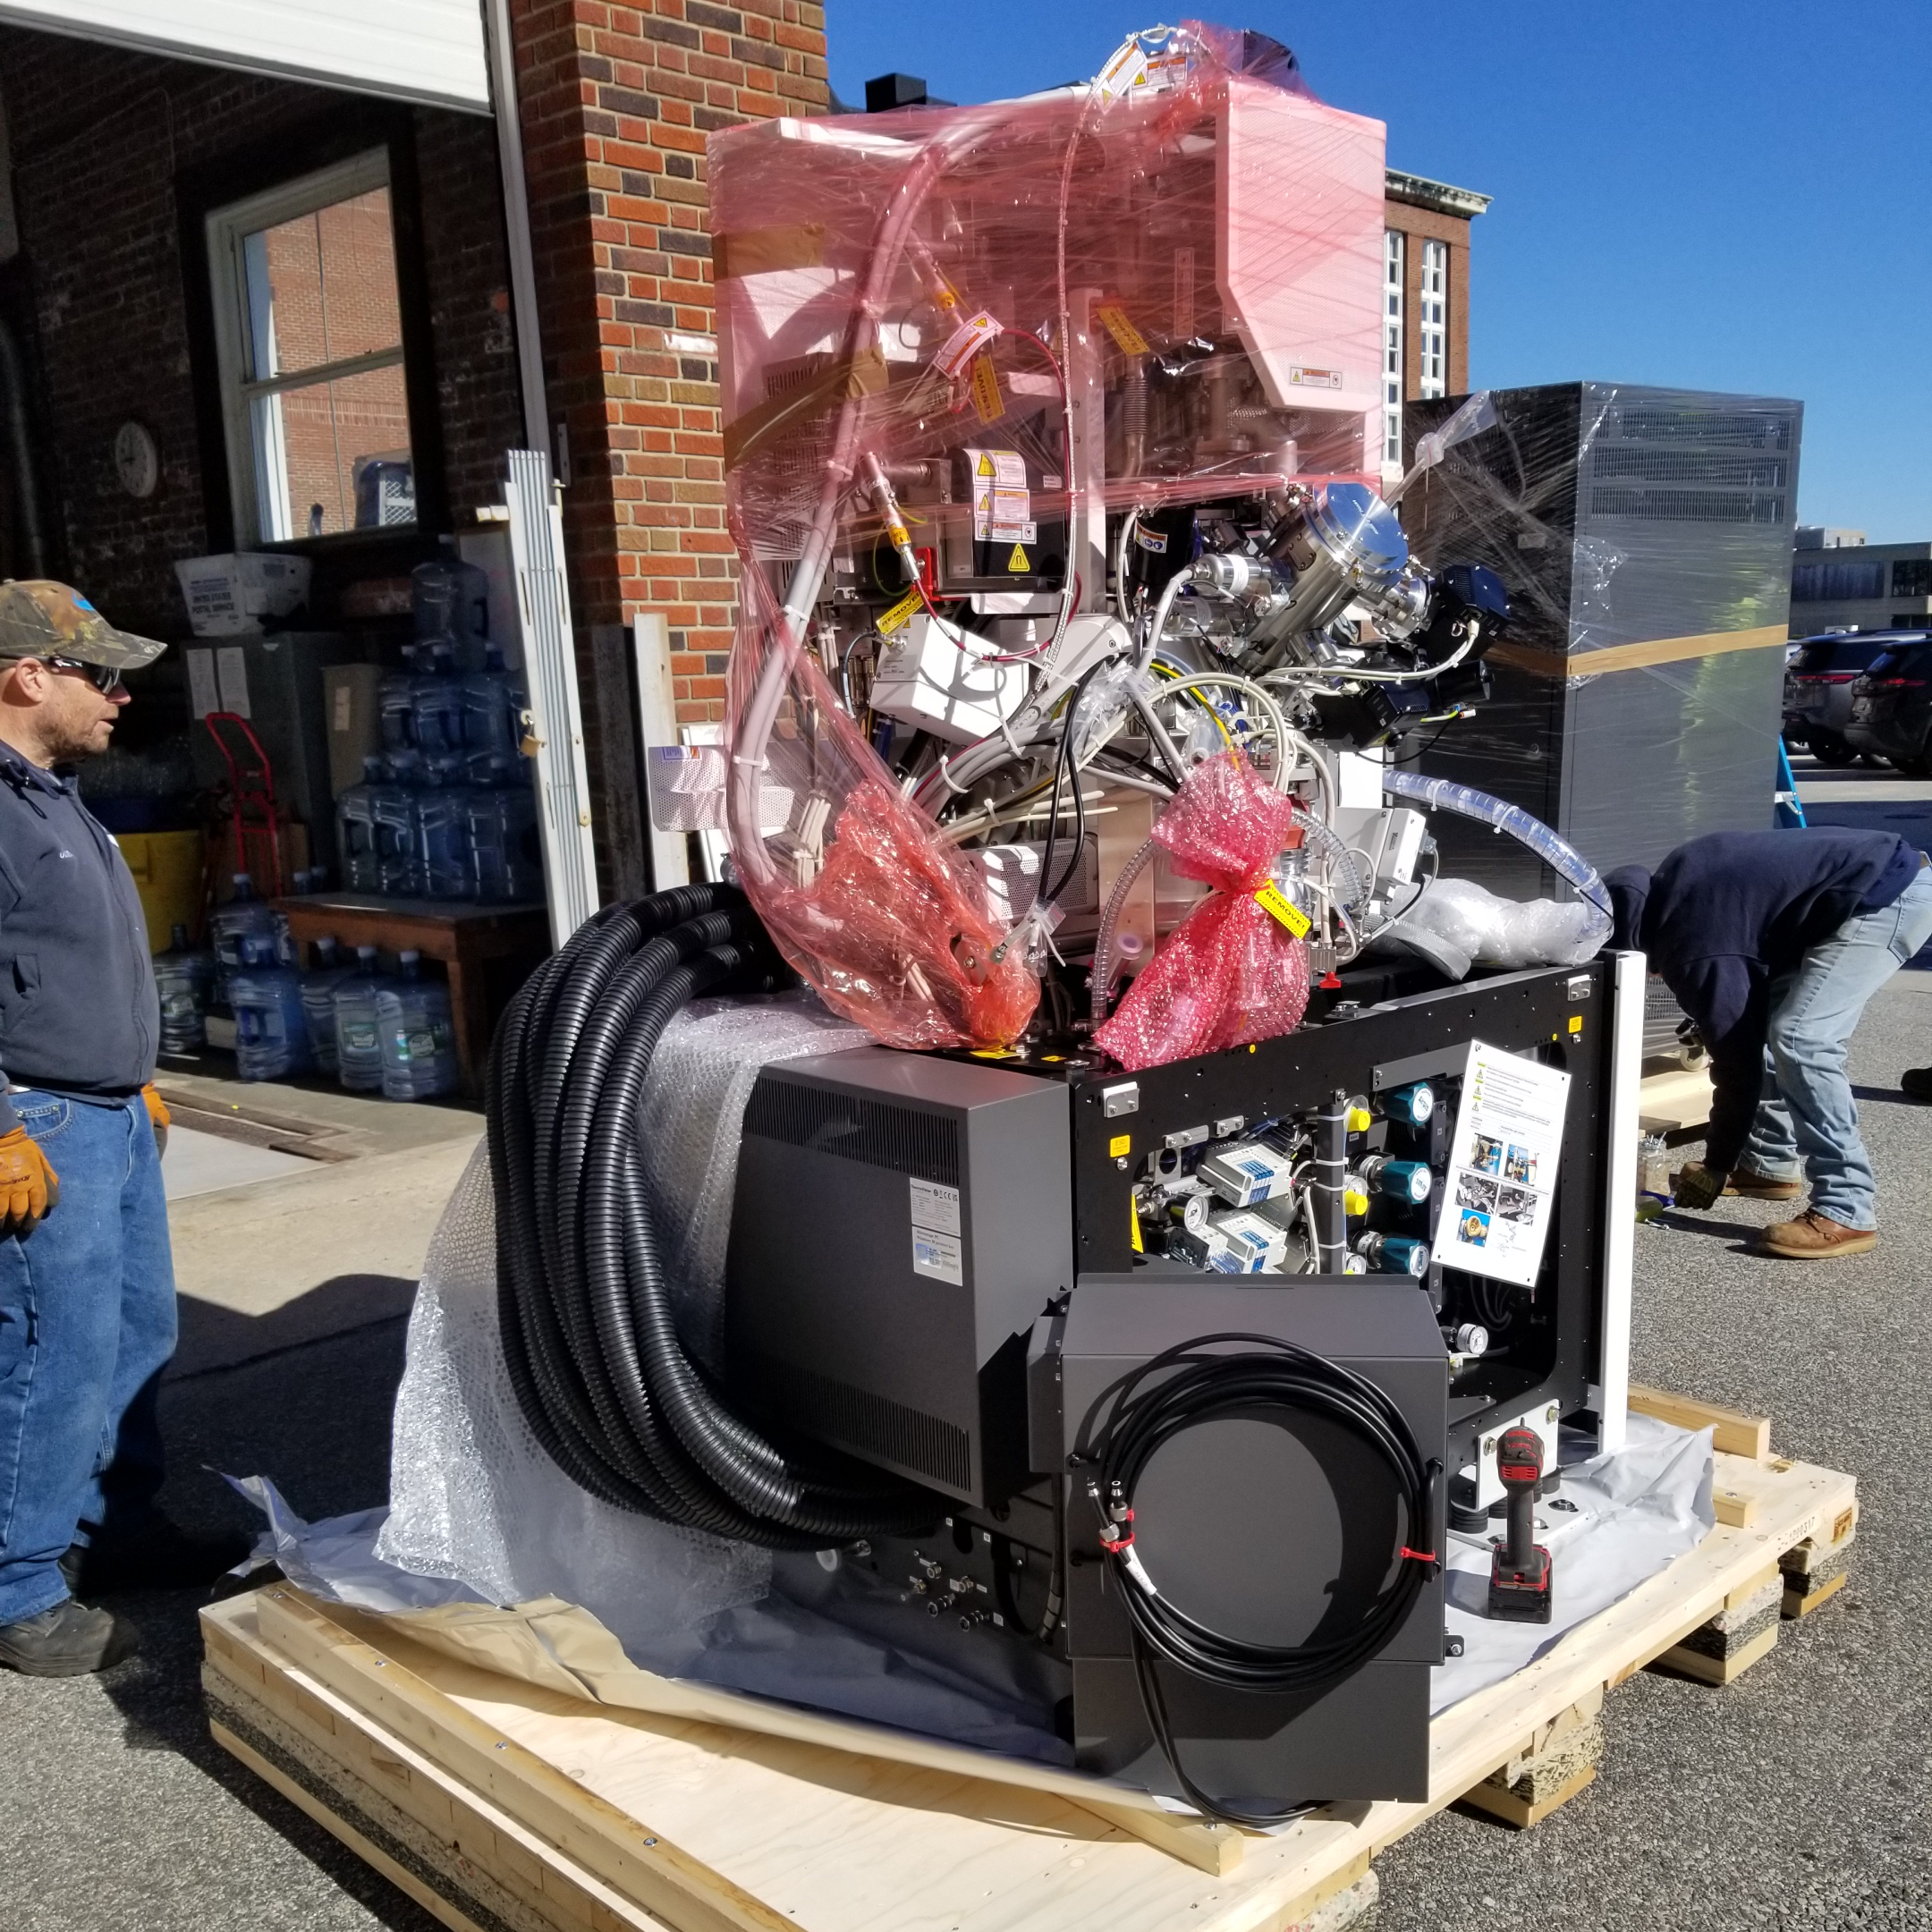 The Thermofisher PFIB-SEM Arrives on the MBL campus for installation in late April. Credit: Louis Kerr